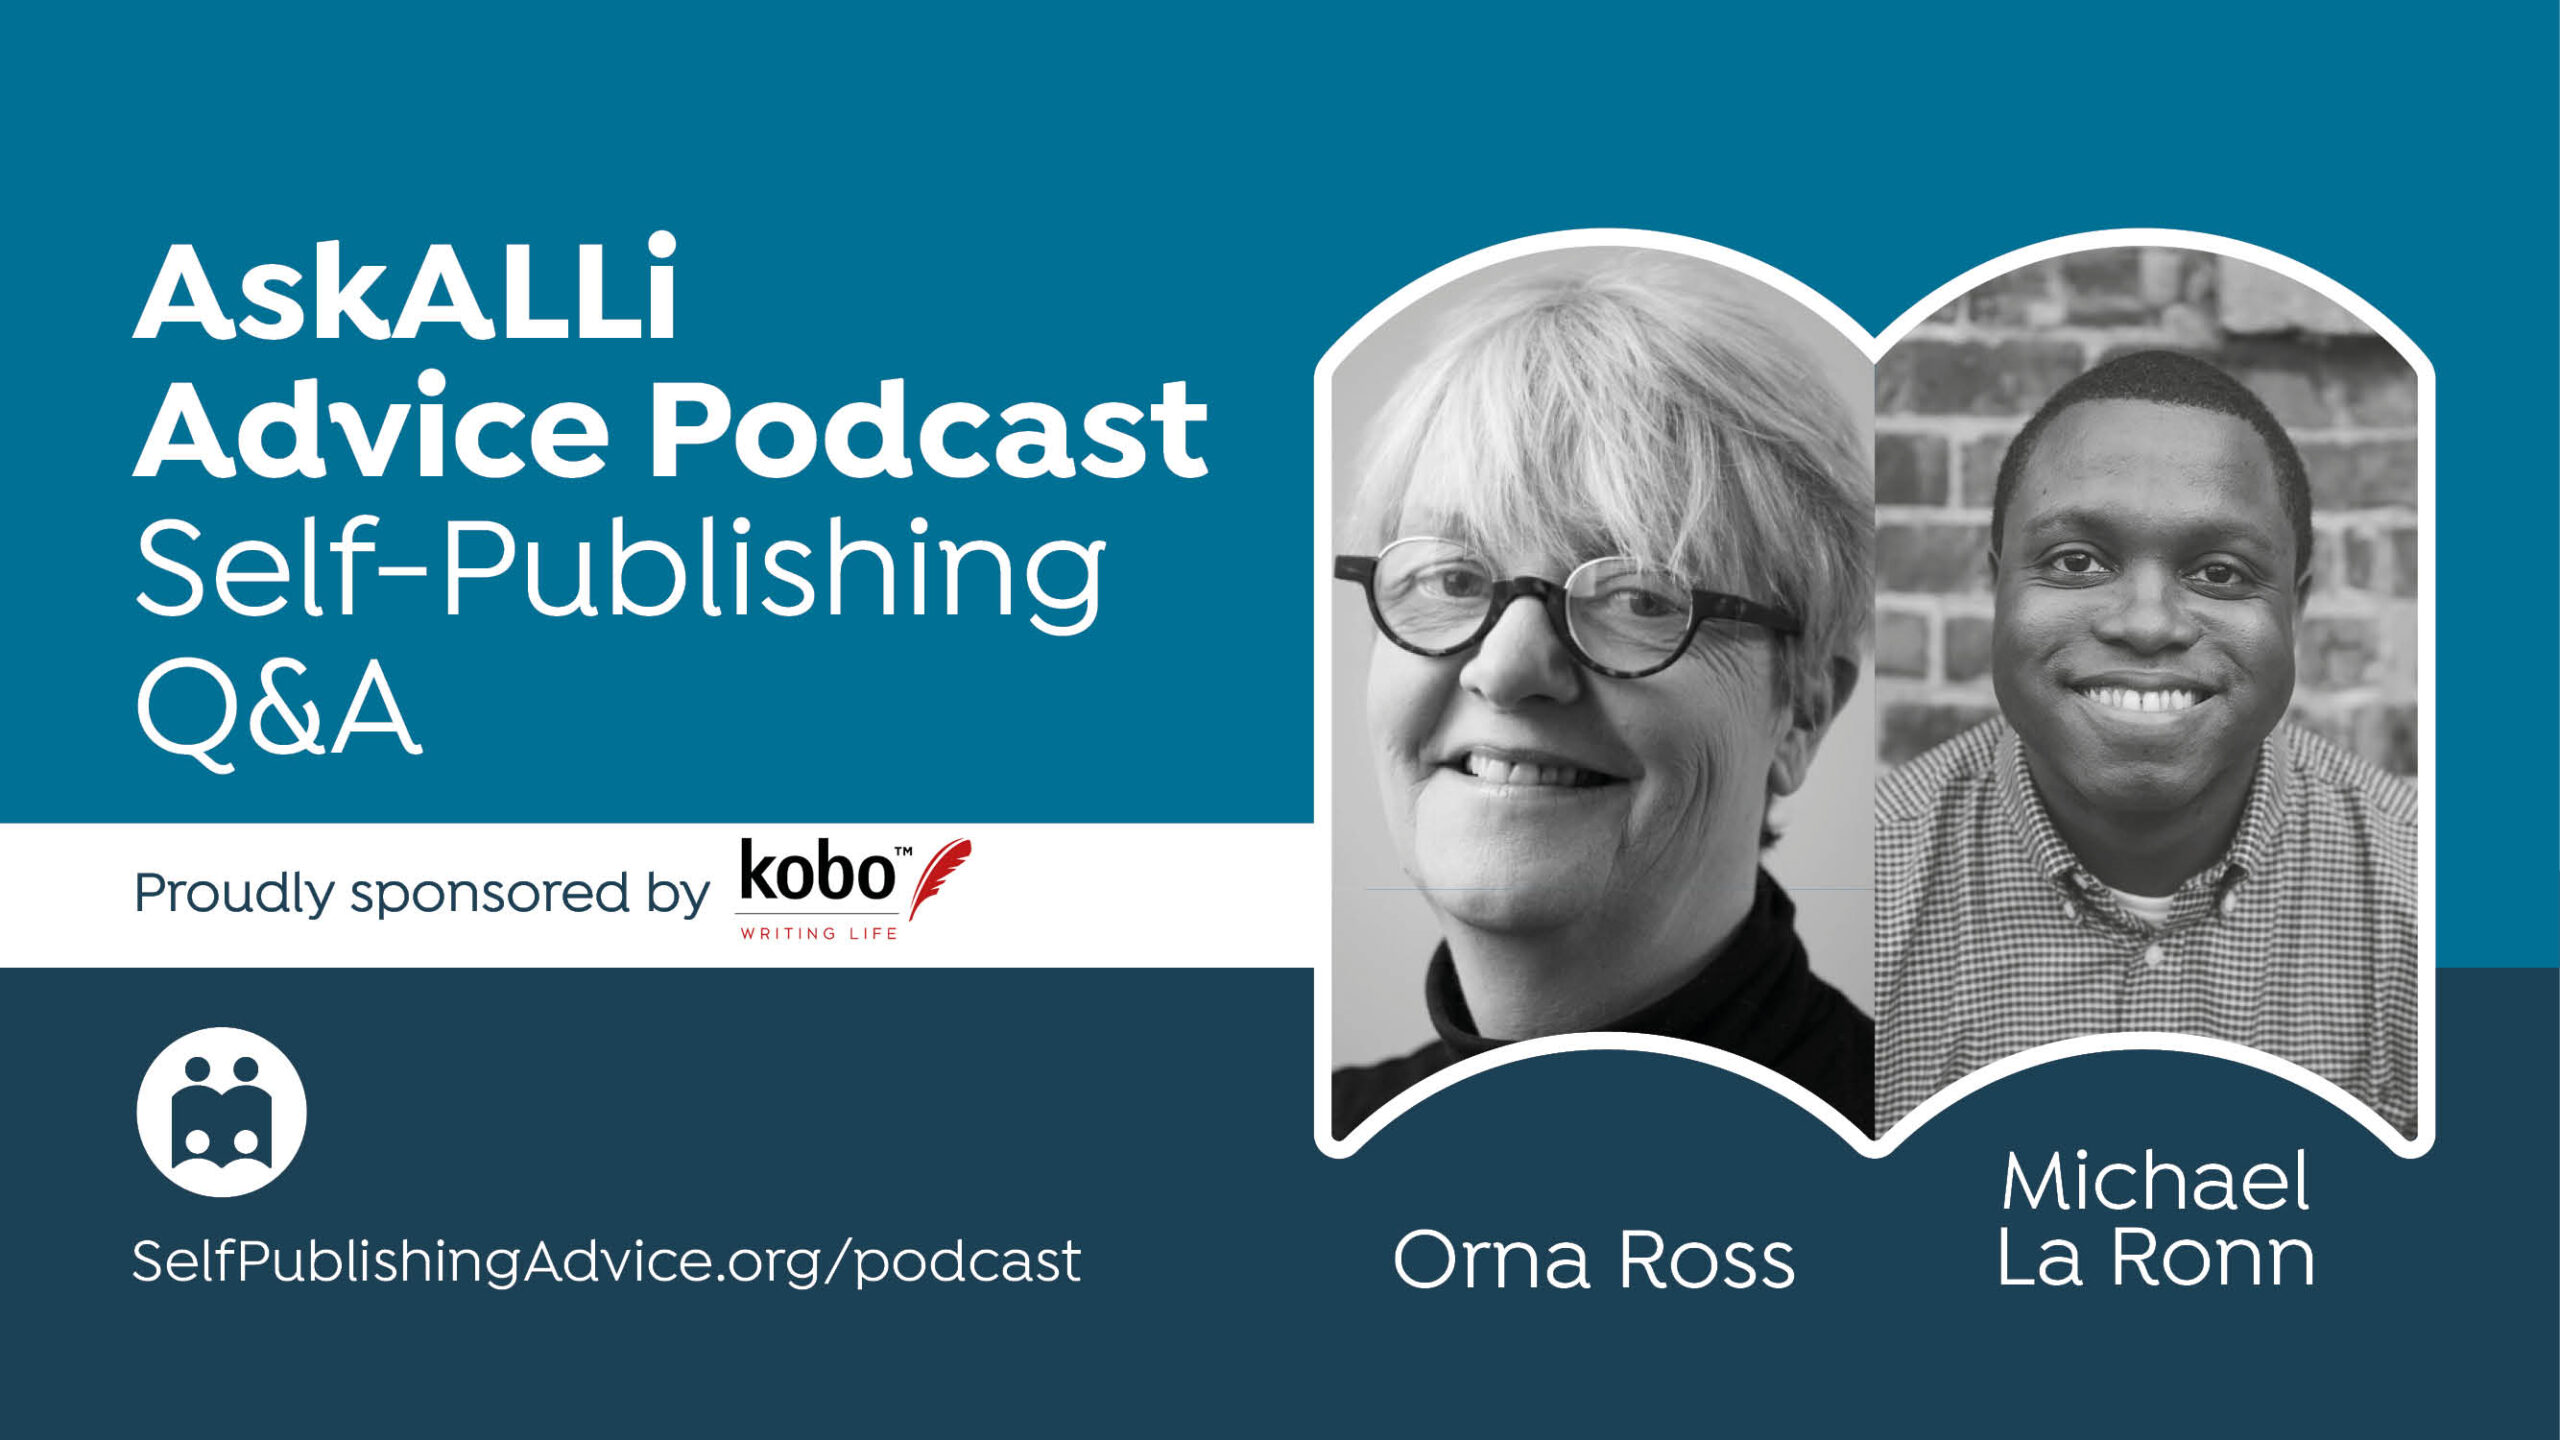 Writing Articles And Short Stories For Magazines; Other Questions Answered By Orna Ross And Michael La Ronn In Our Member Q&A Podcast